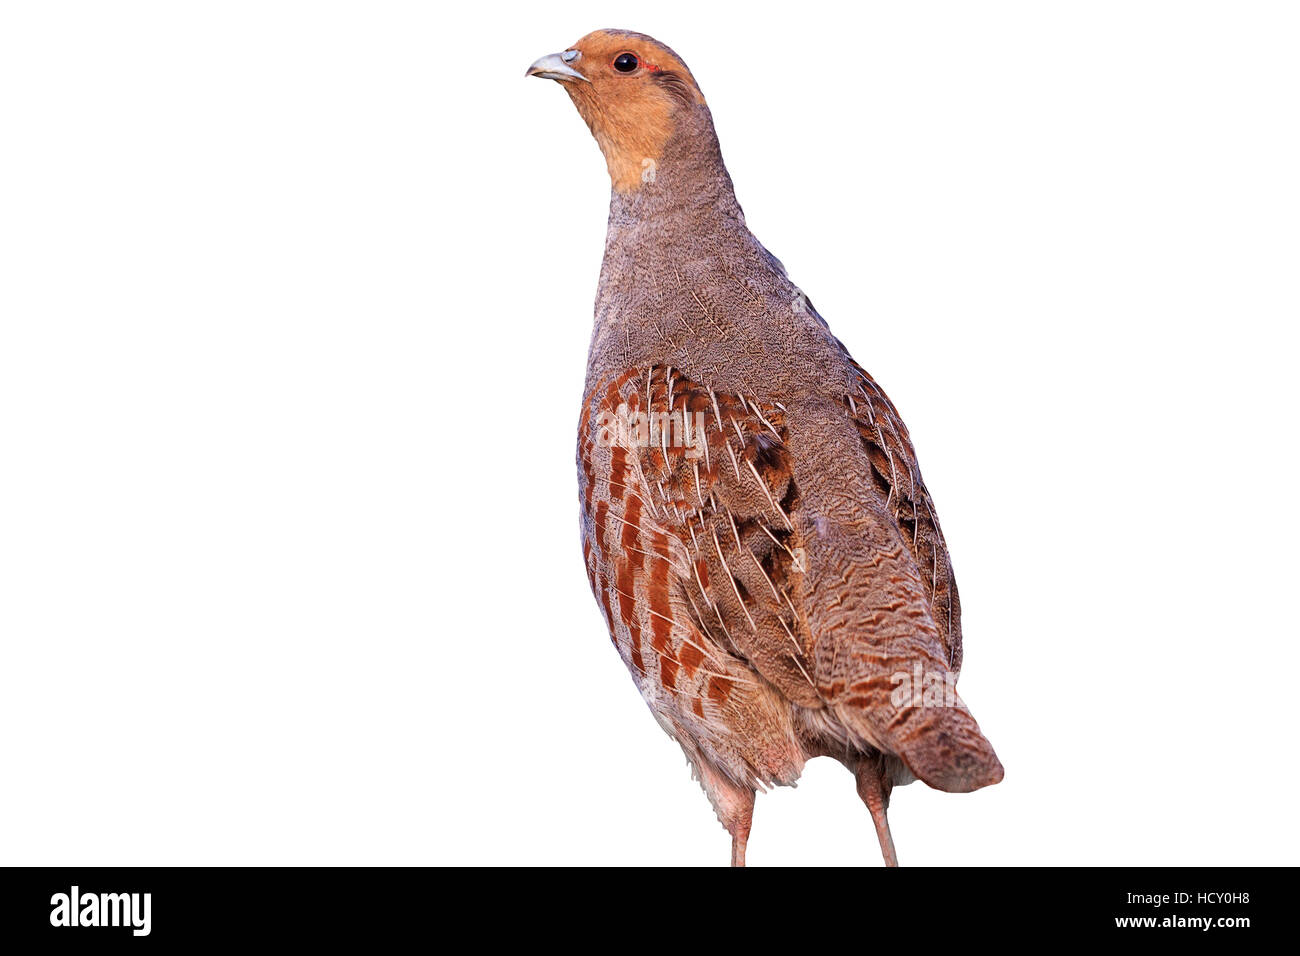 gray partridge isolated on a white background,bird hunting, trophy, wild bird Stock Photo